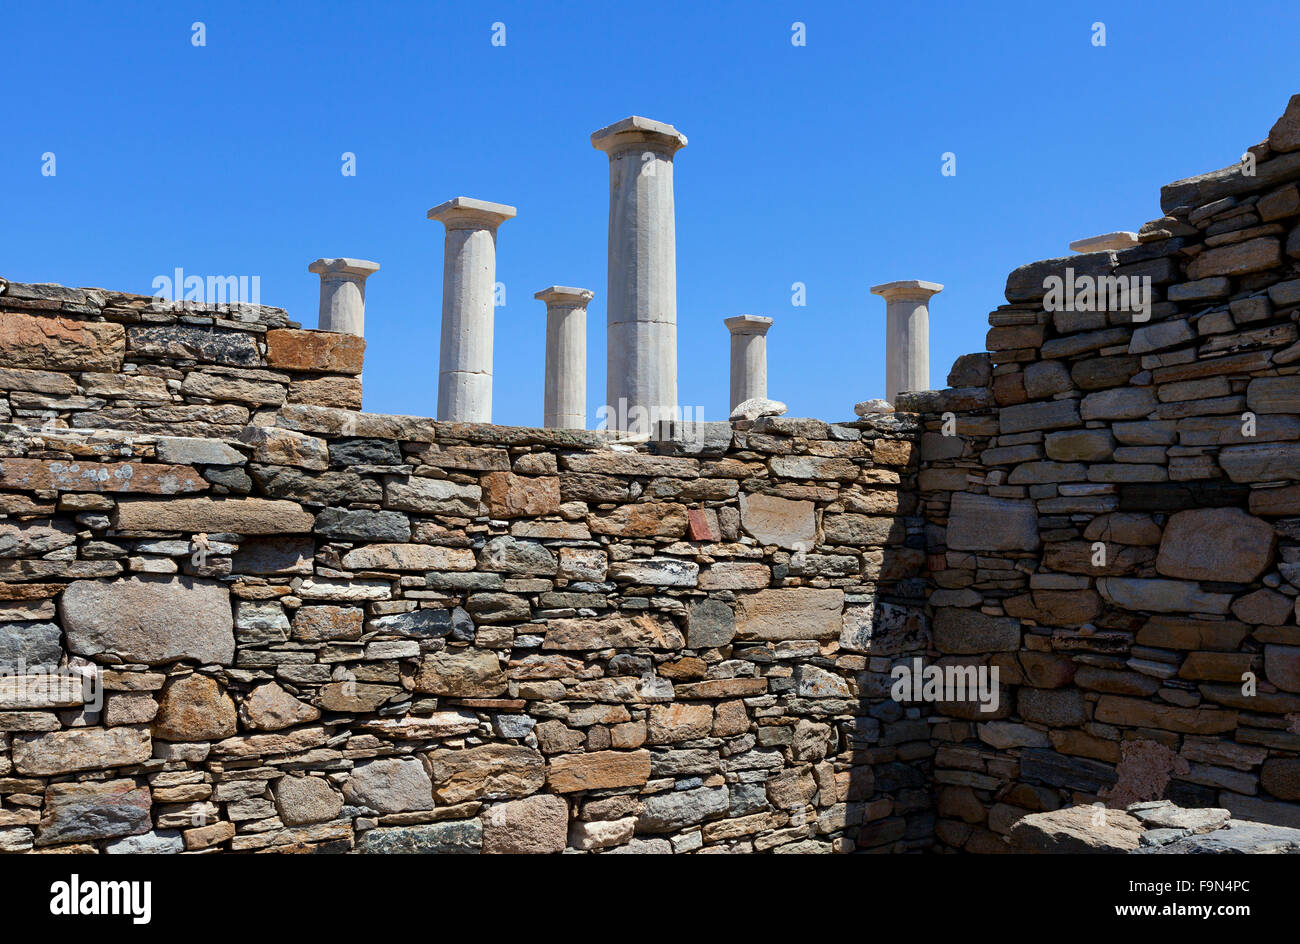 Archaeological site on the island of Delos, near Mykonos Stock Photo